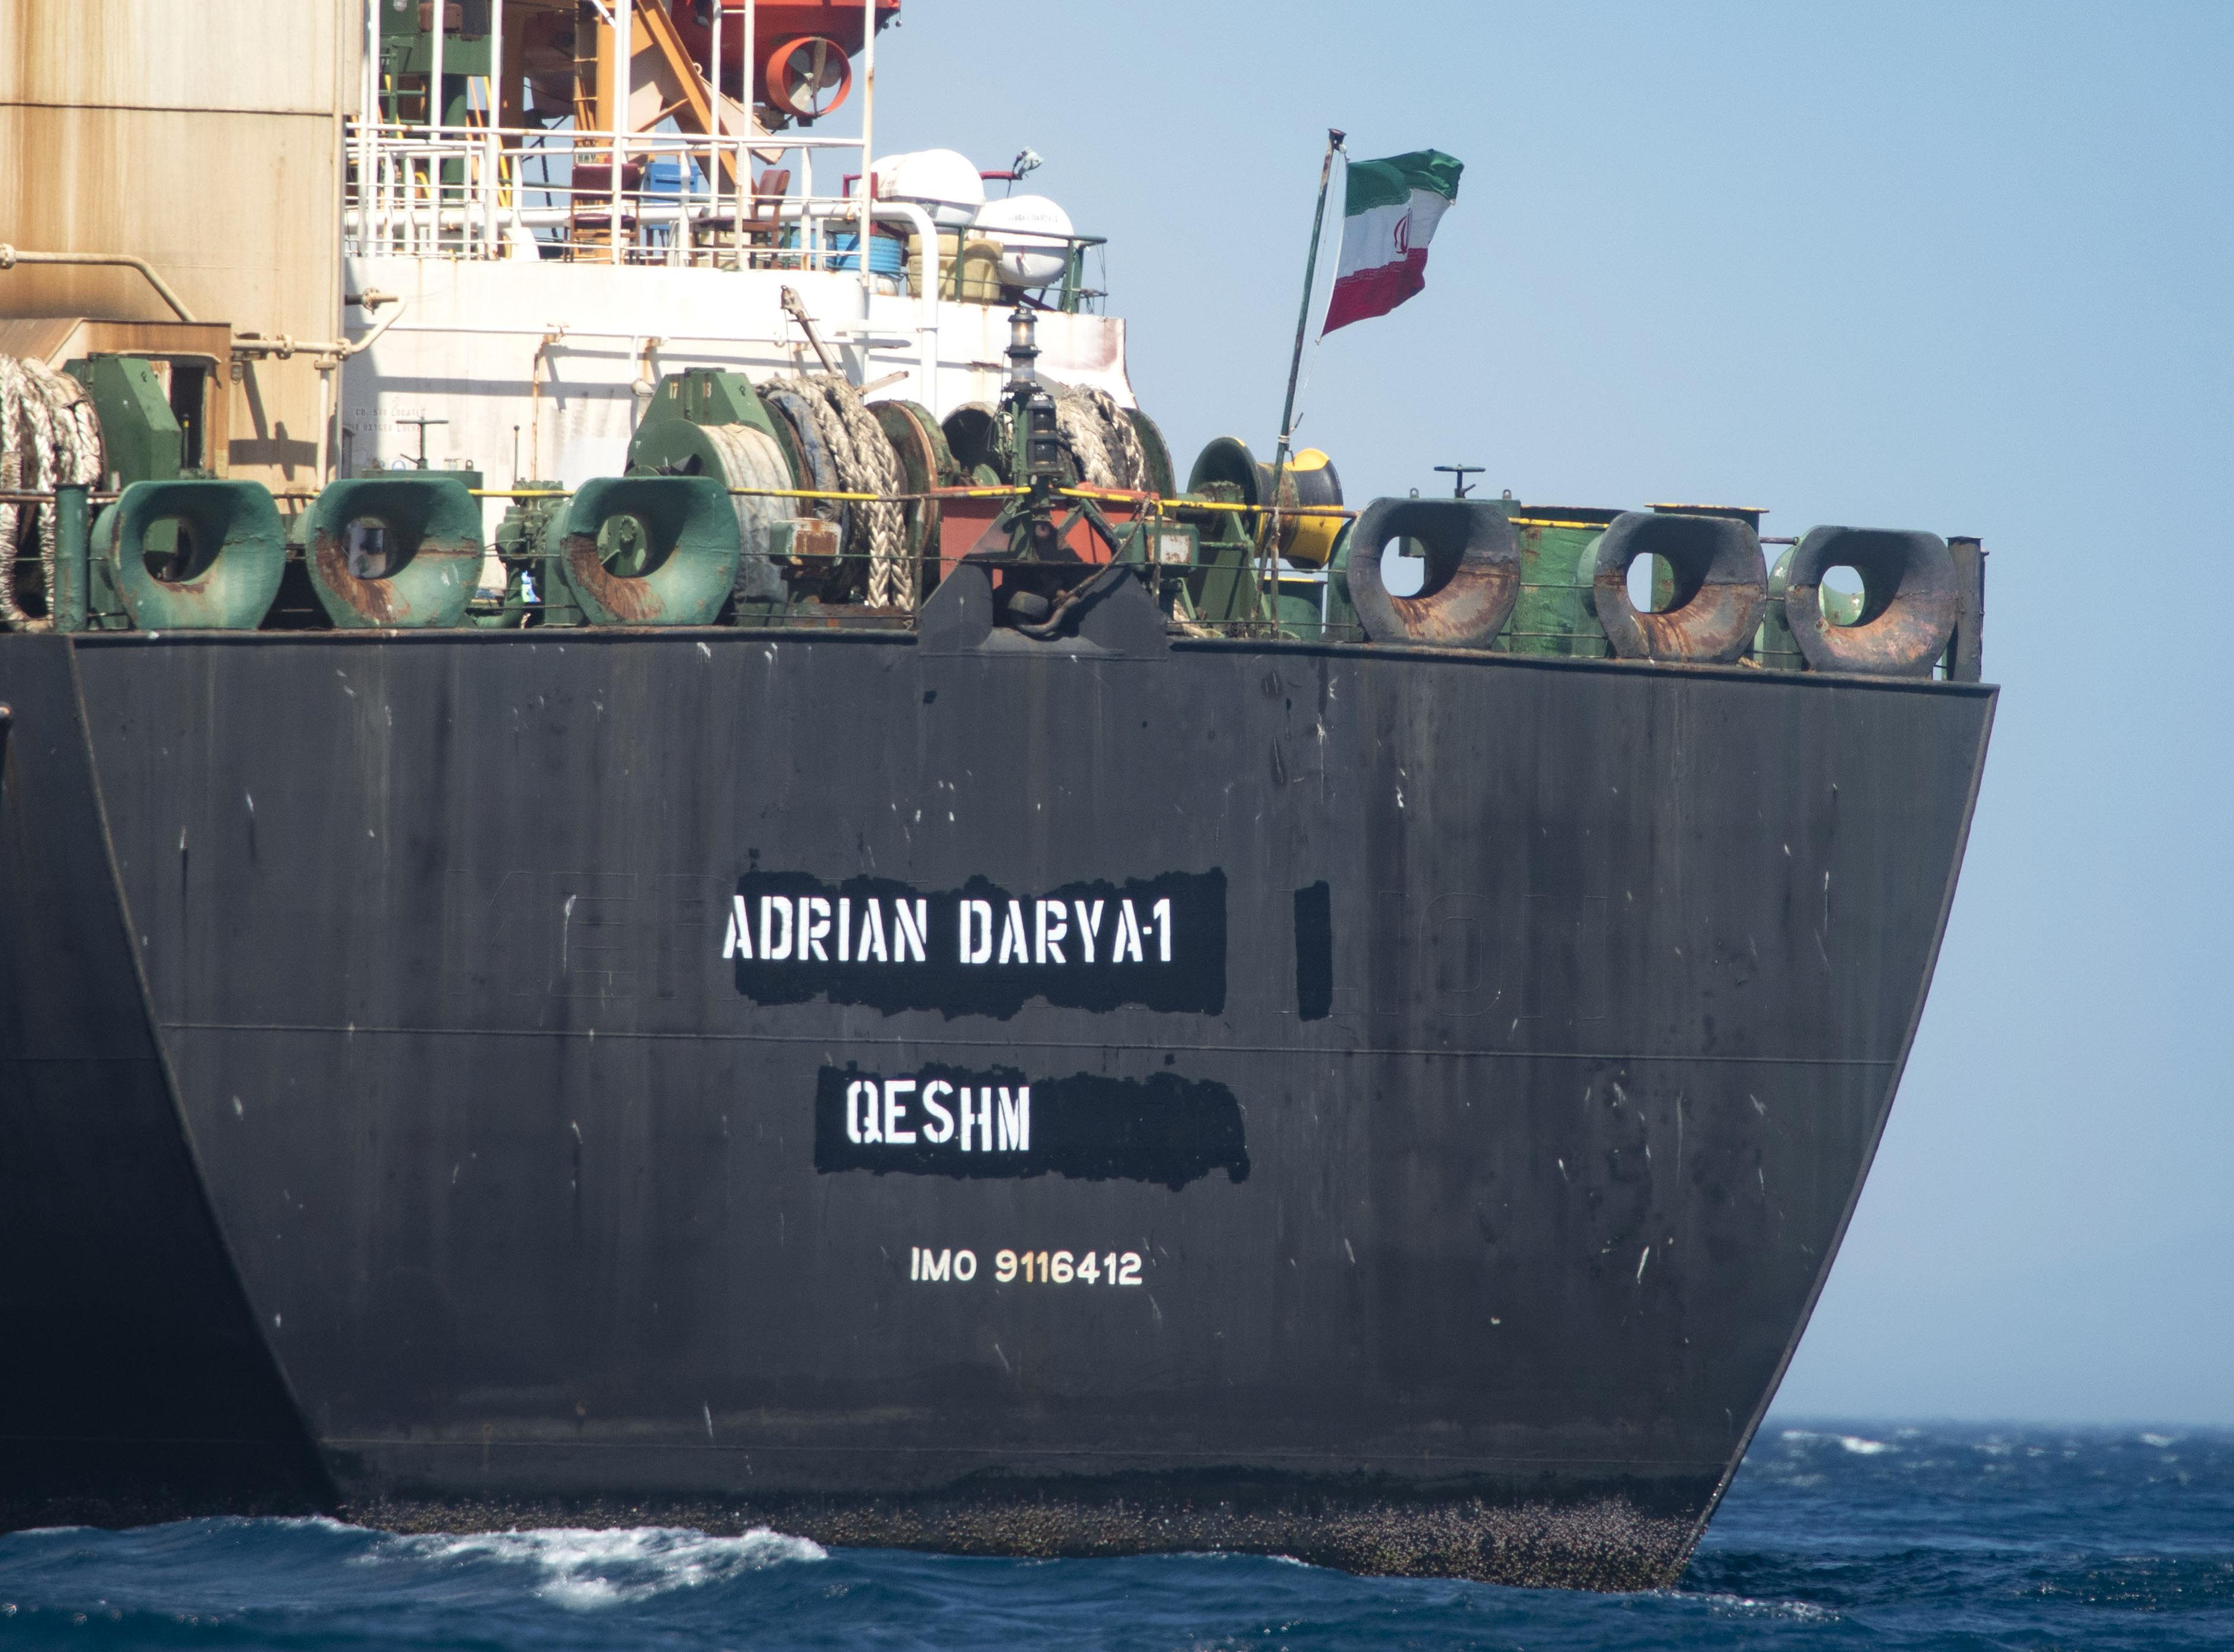 Image result for An Iranian oil supertanker that was seized by the UK, a move that came amid escalating tension between Tehran and the West, has been released. The Adrian Darya, formerly known as the Grace 1, set sail under an Iranian flag for an unknown destination.